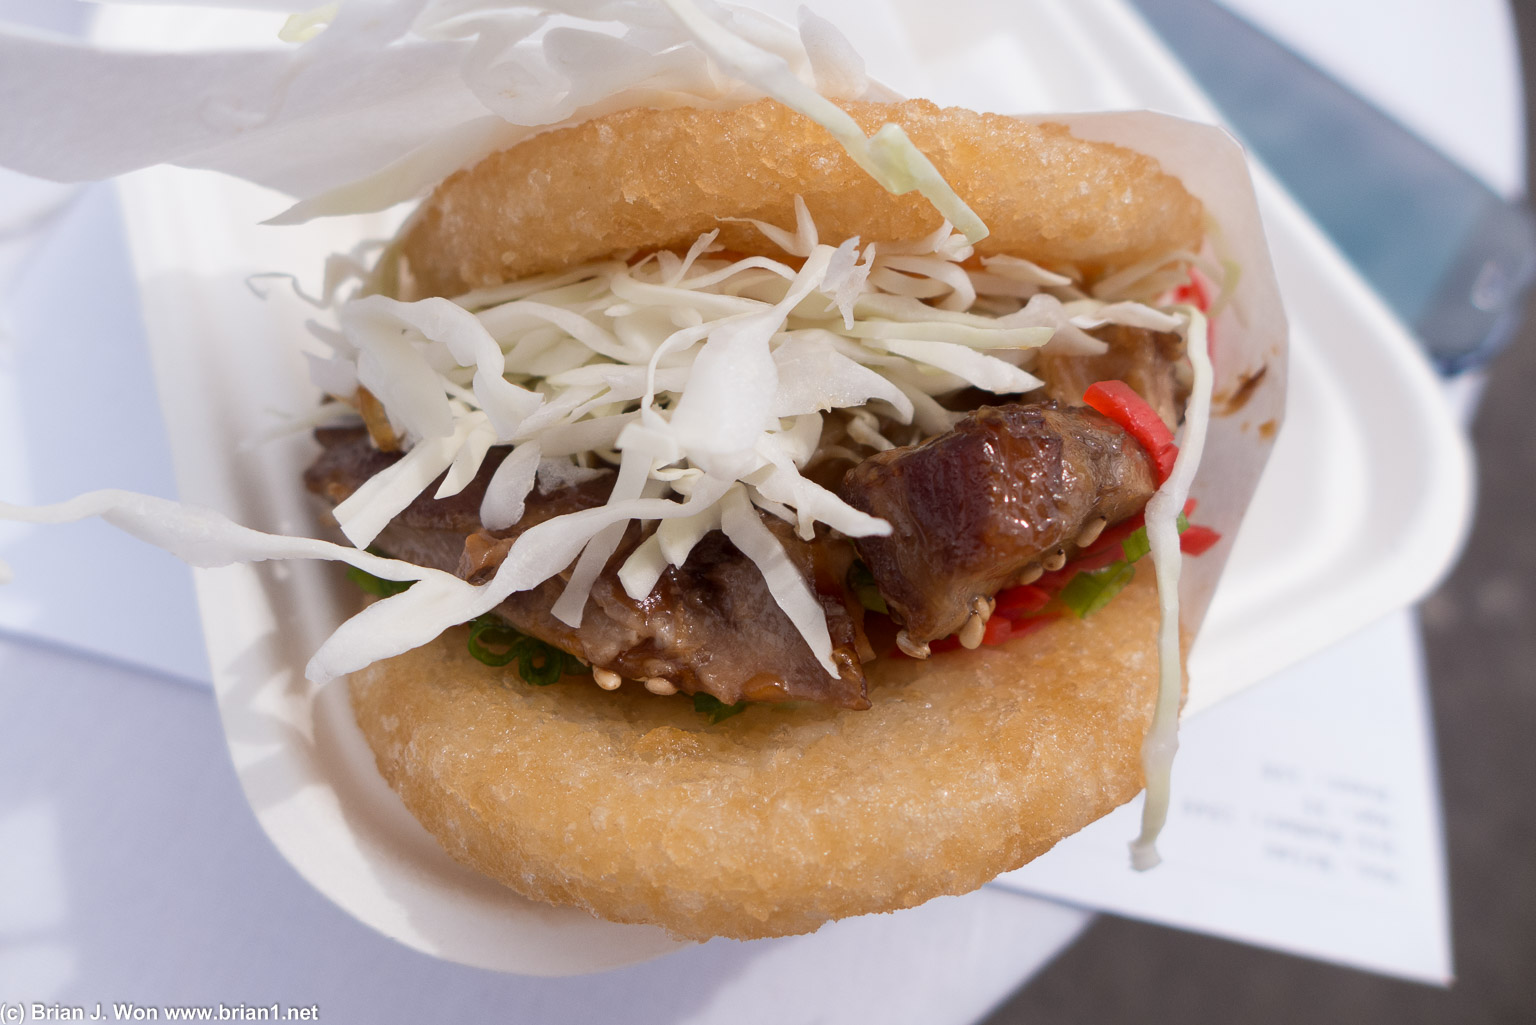 Pork belly with a rice patty bun. Eh. Great in theory, reality was too greasy, fell apart.